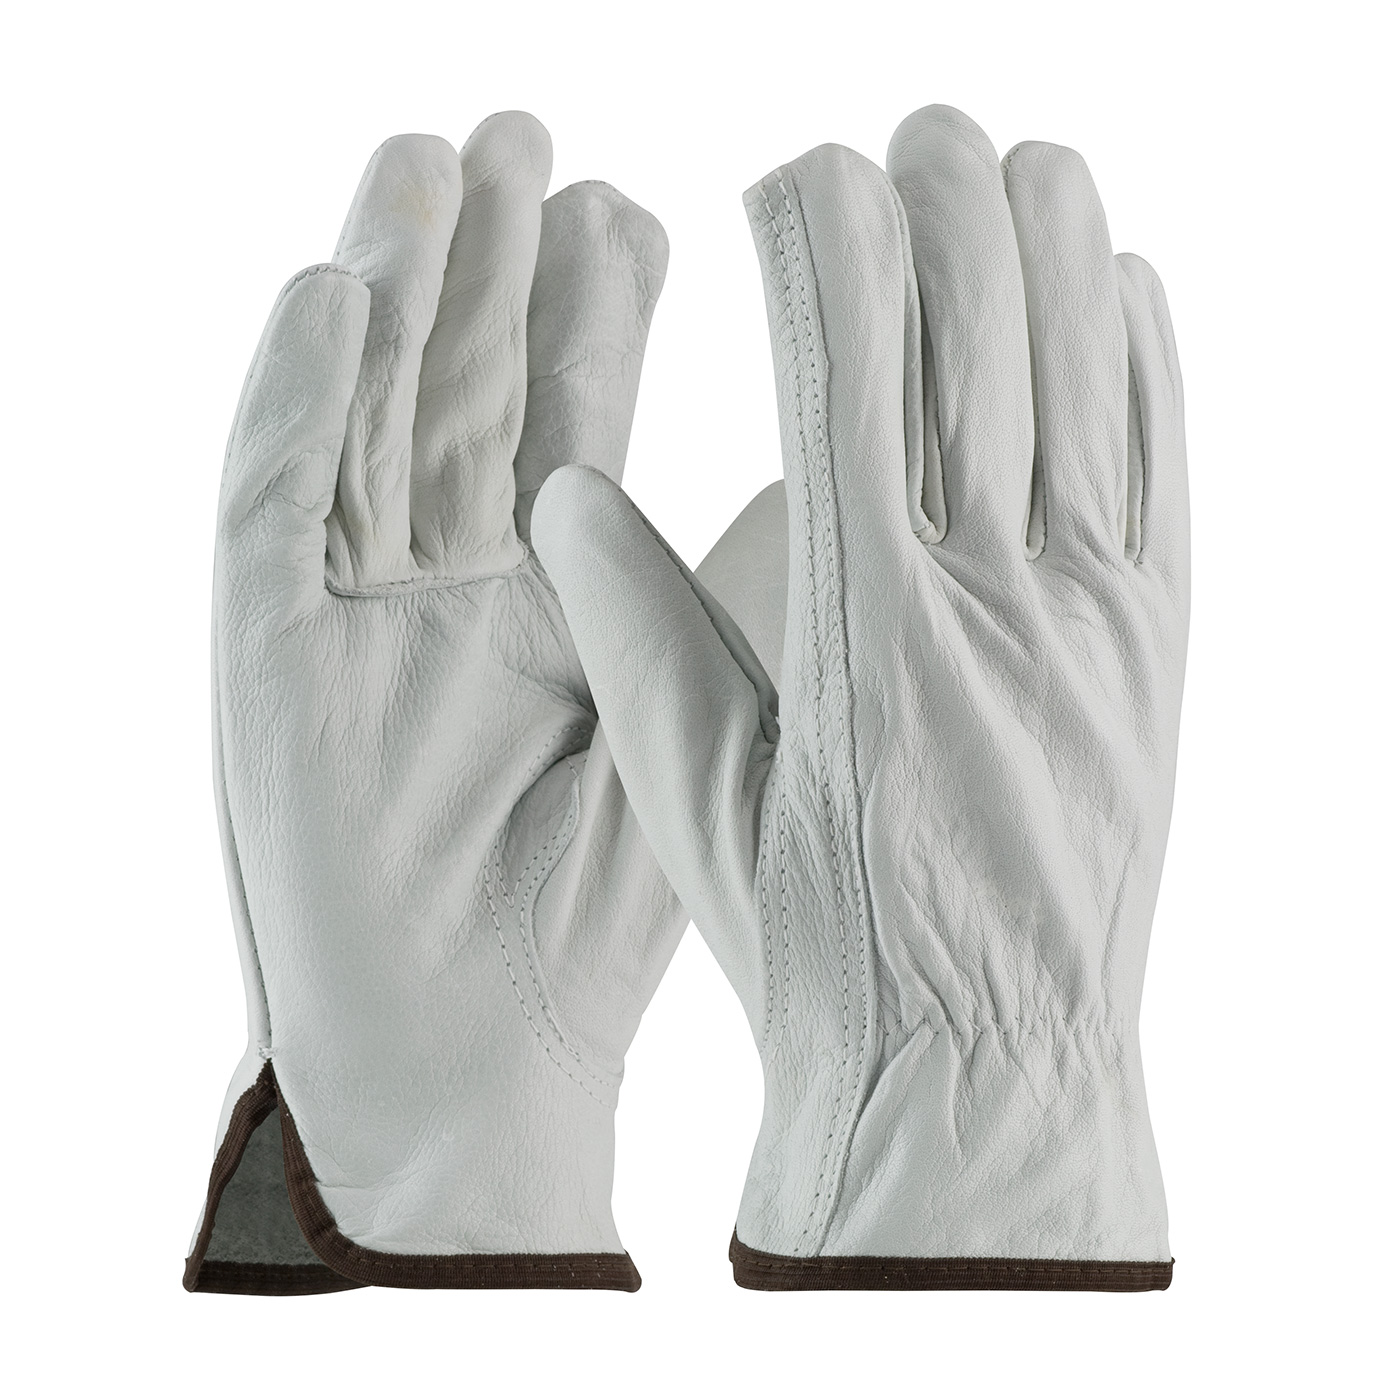 Leather Drivers Work Gloves 